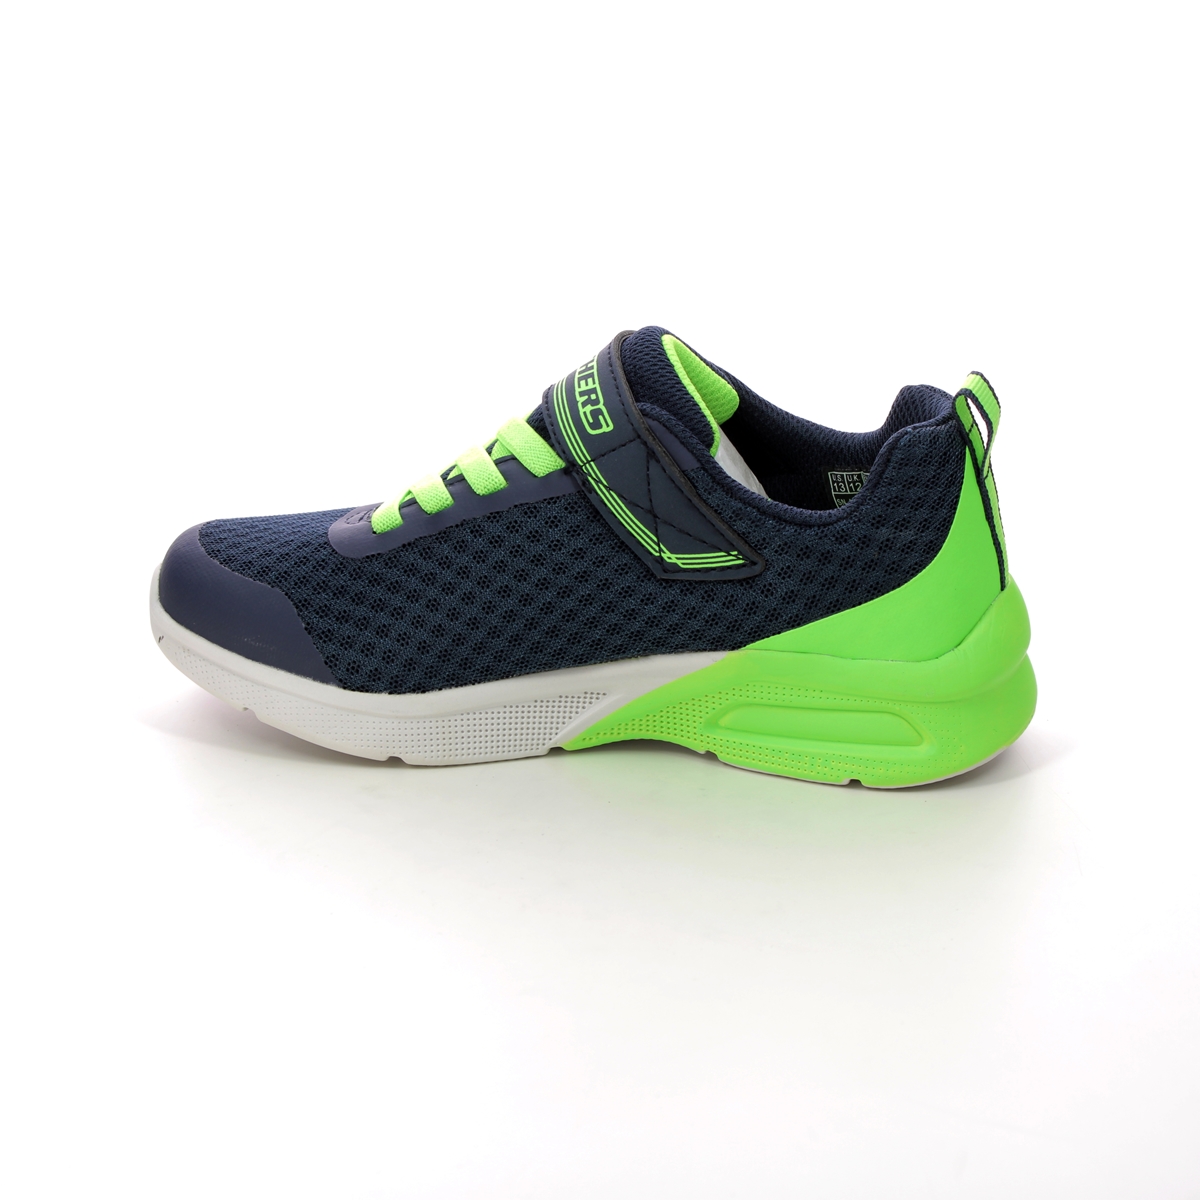 Skechers Microspec Max 403773L NVLM Navy Lime trainers